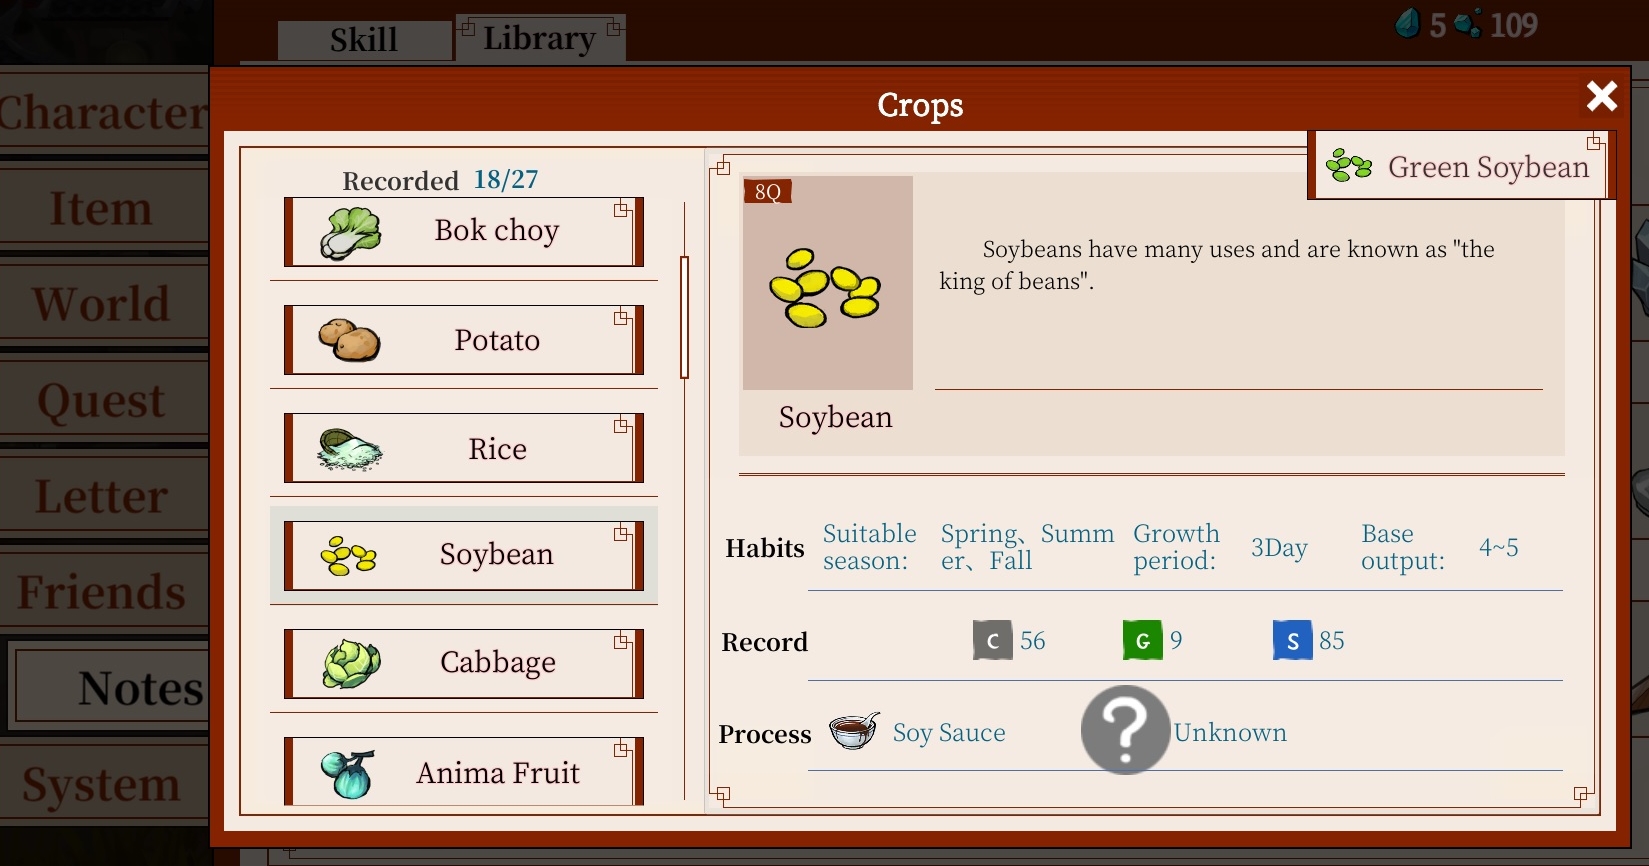 Crops and Legendary Crops image 2